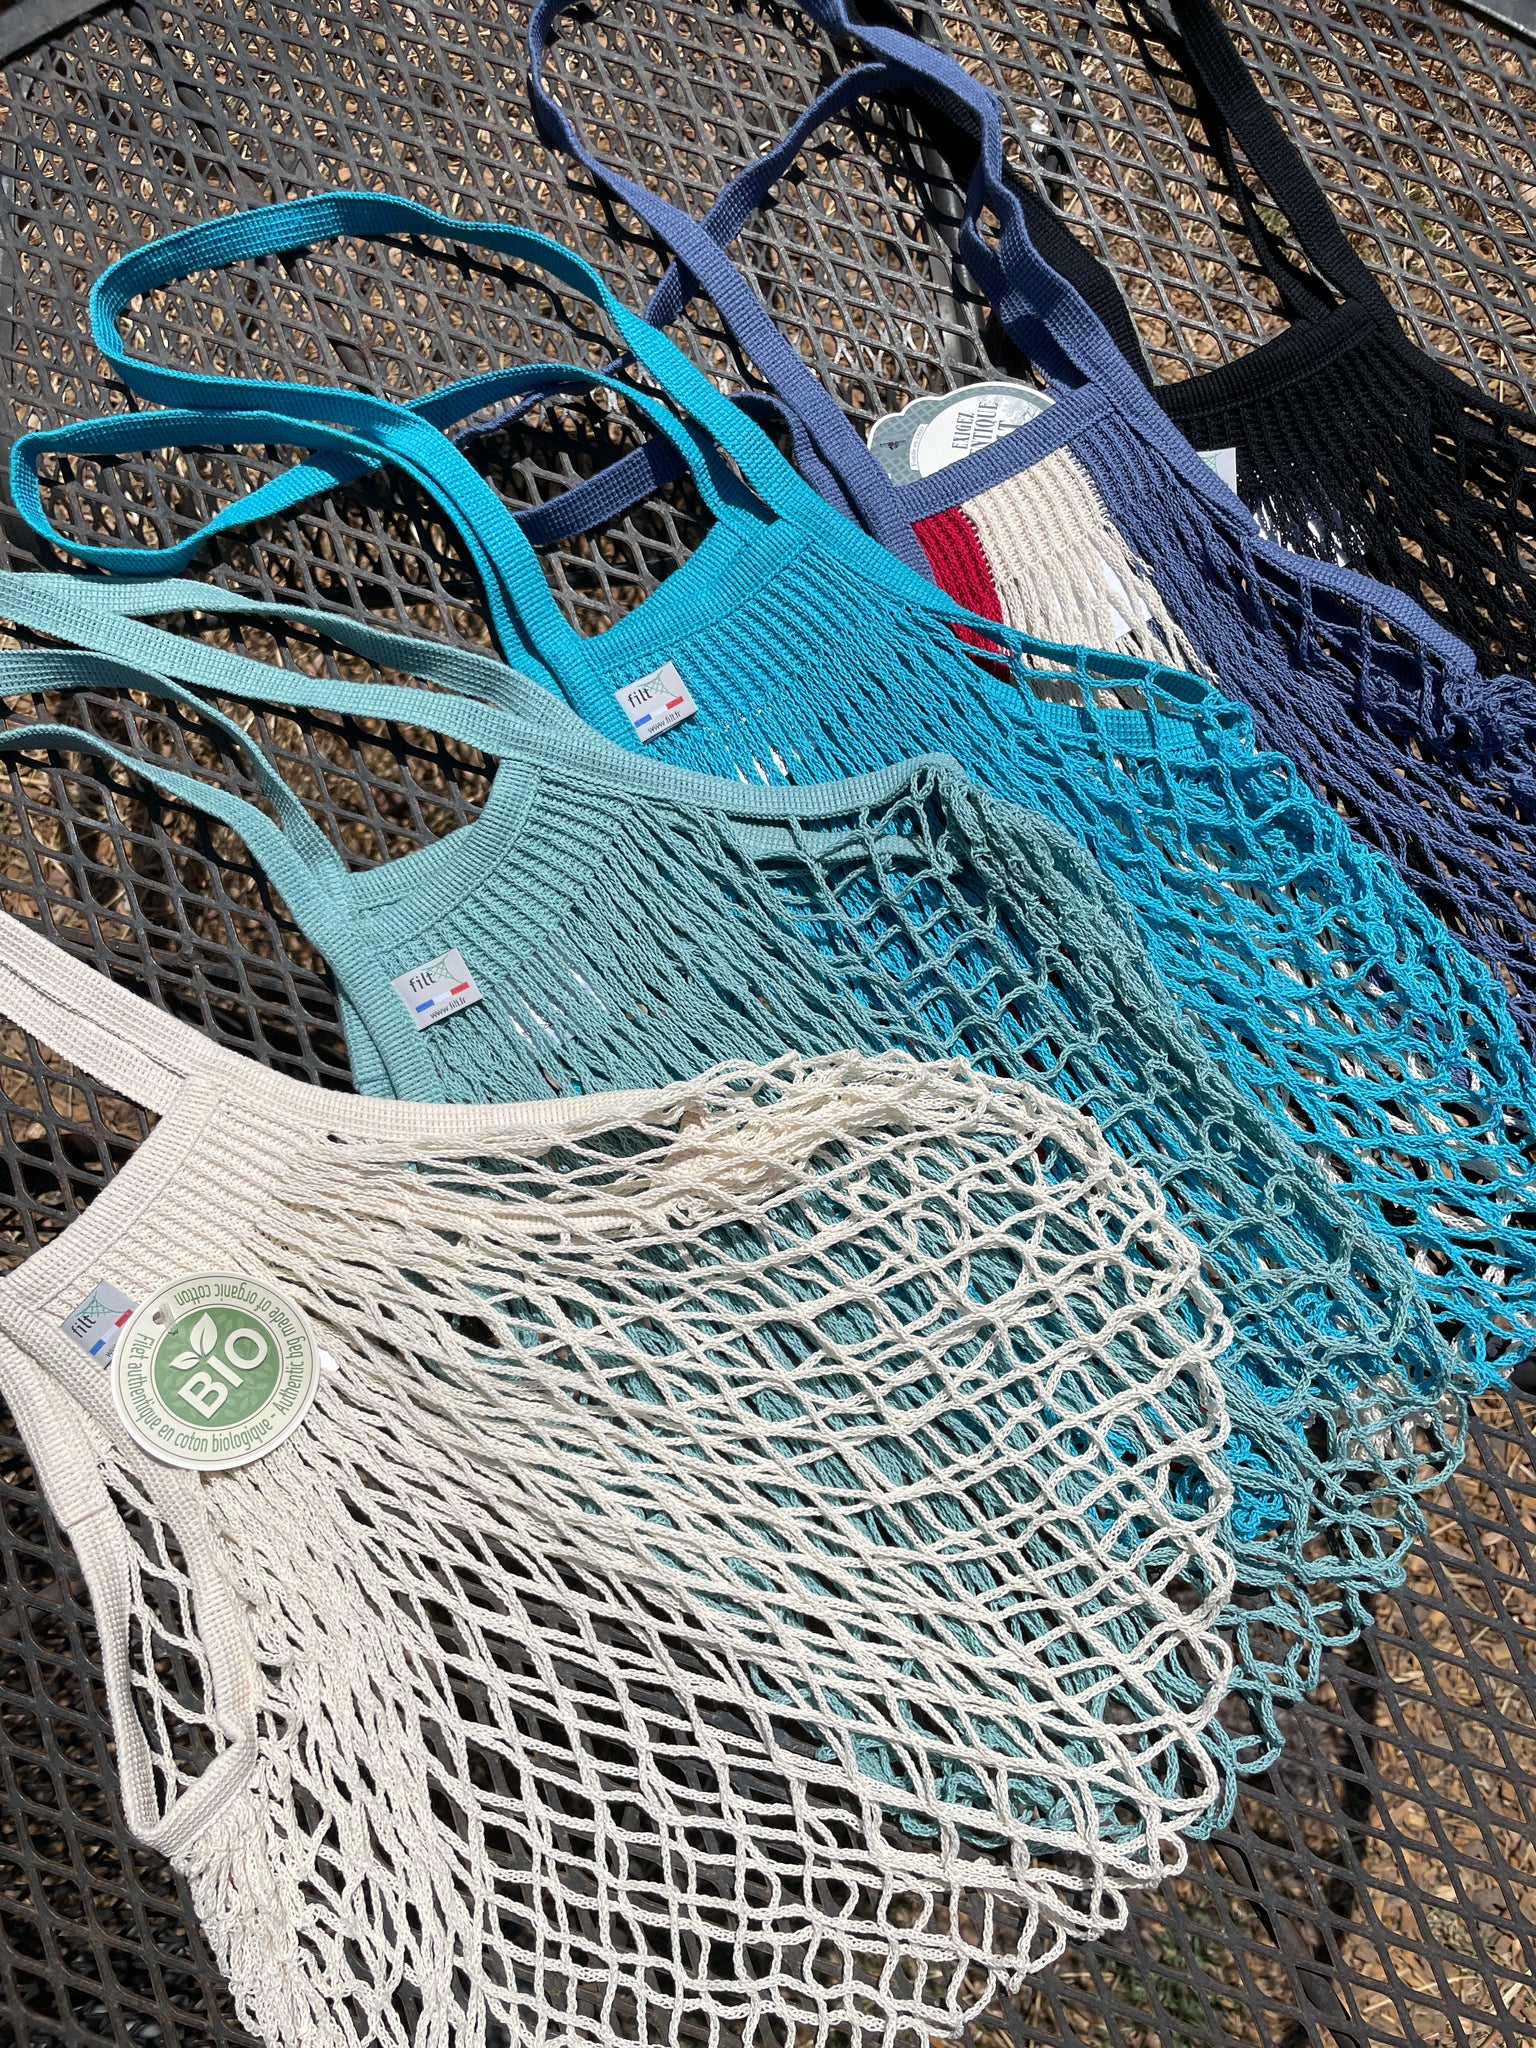 5 net shopping bags in different colors: beige, aqua, teal, red/white/blue, black.